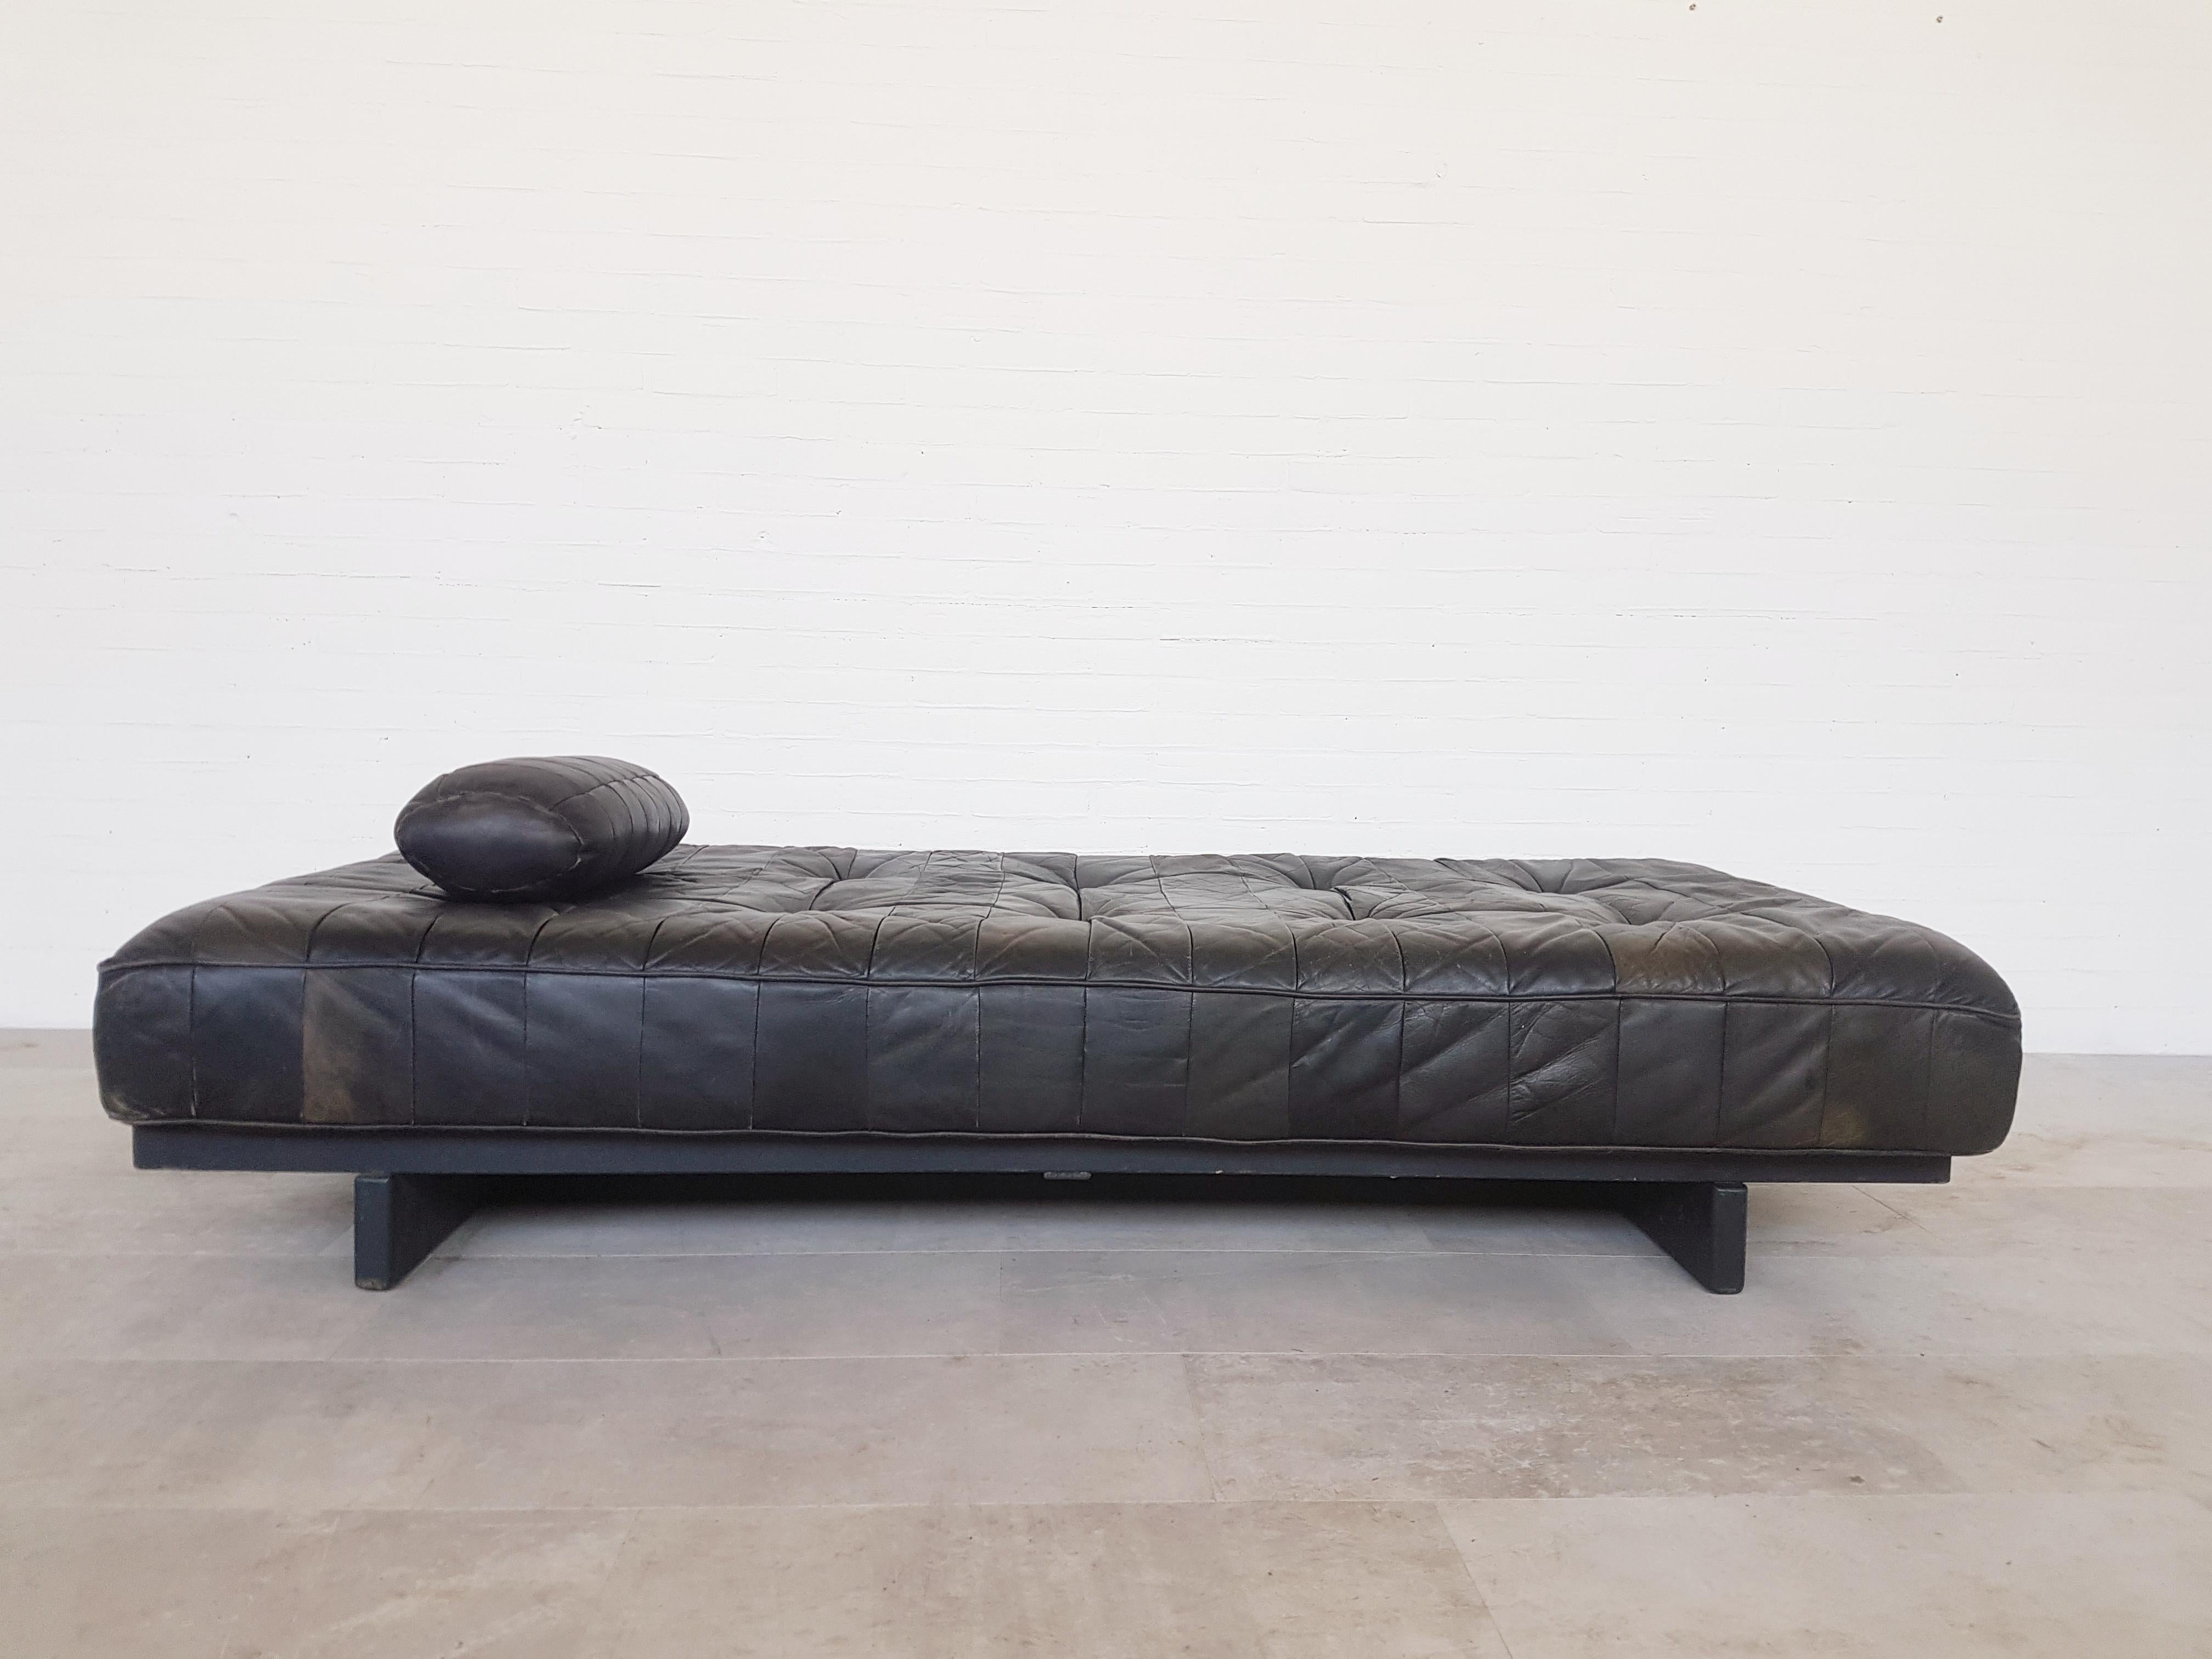 Minimalist Mid-Century Modern piece with tons of character due to the original patina on the leather.
De Sede manufactured this daybed which sits on a black wooden frame and is upholstered in soft patchwork aniline leather.
Switzerland 1970s.